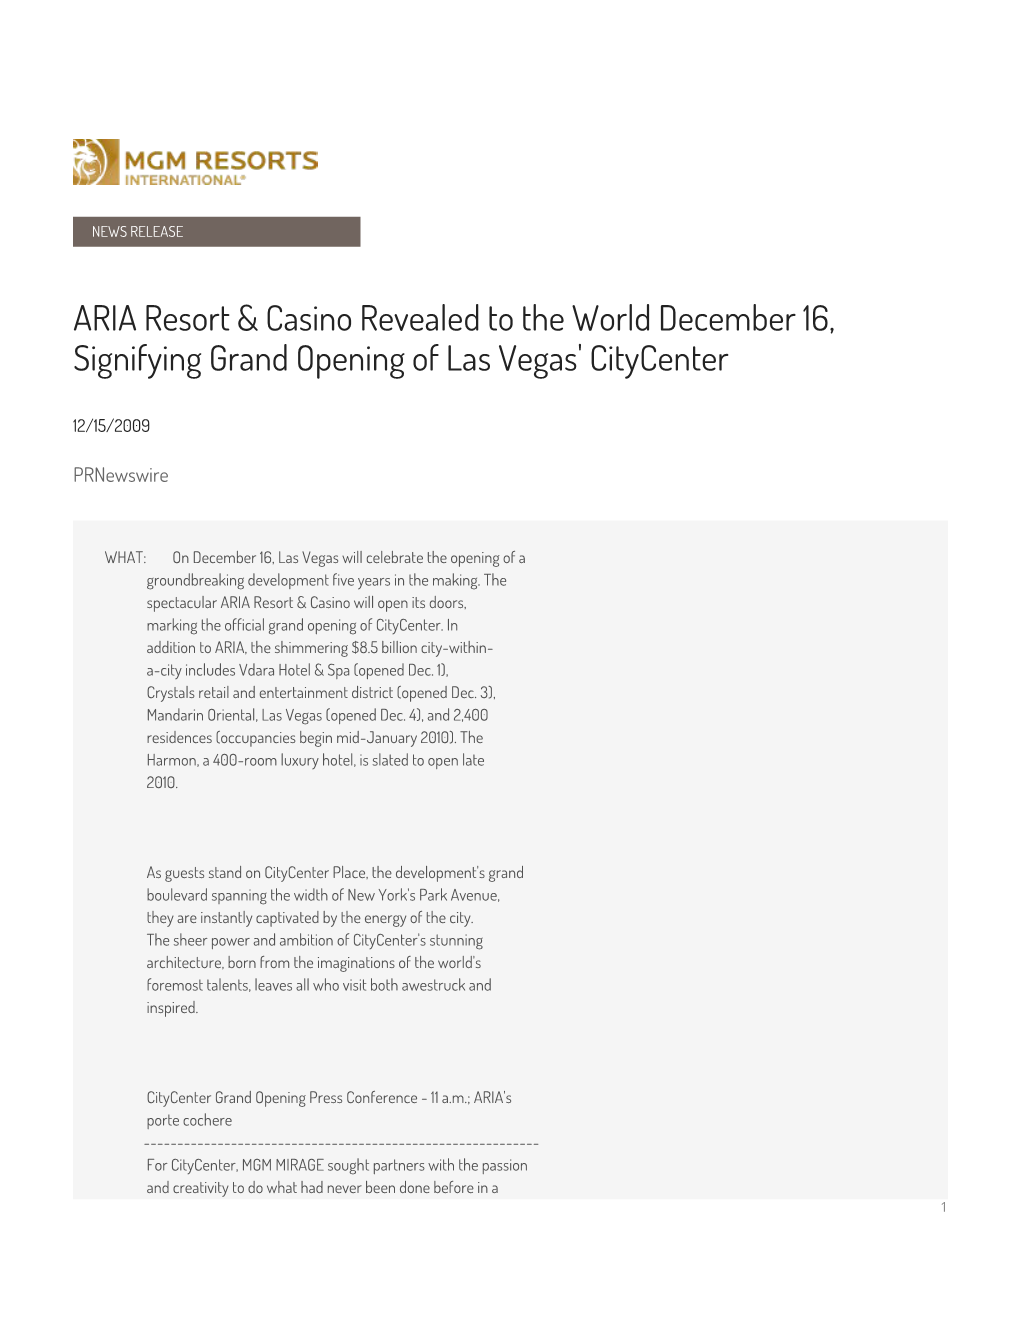 ARIA Resort & Casino Revealed to the World December 16, Signifying